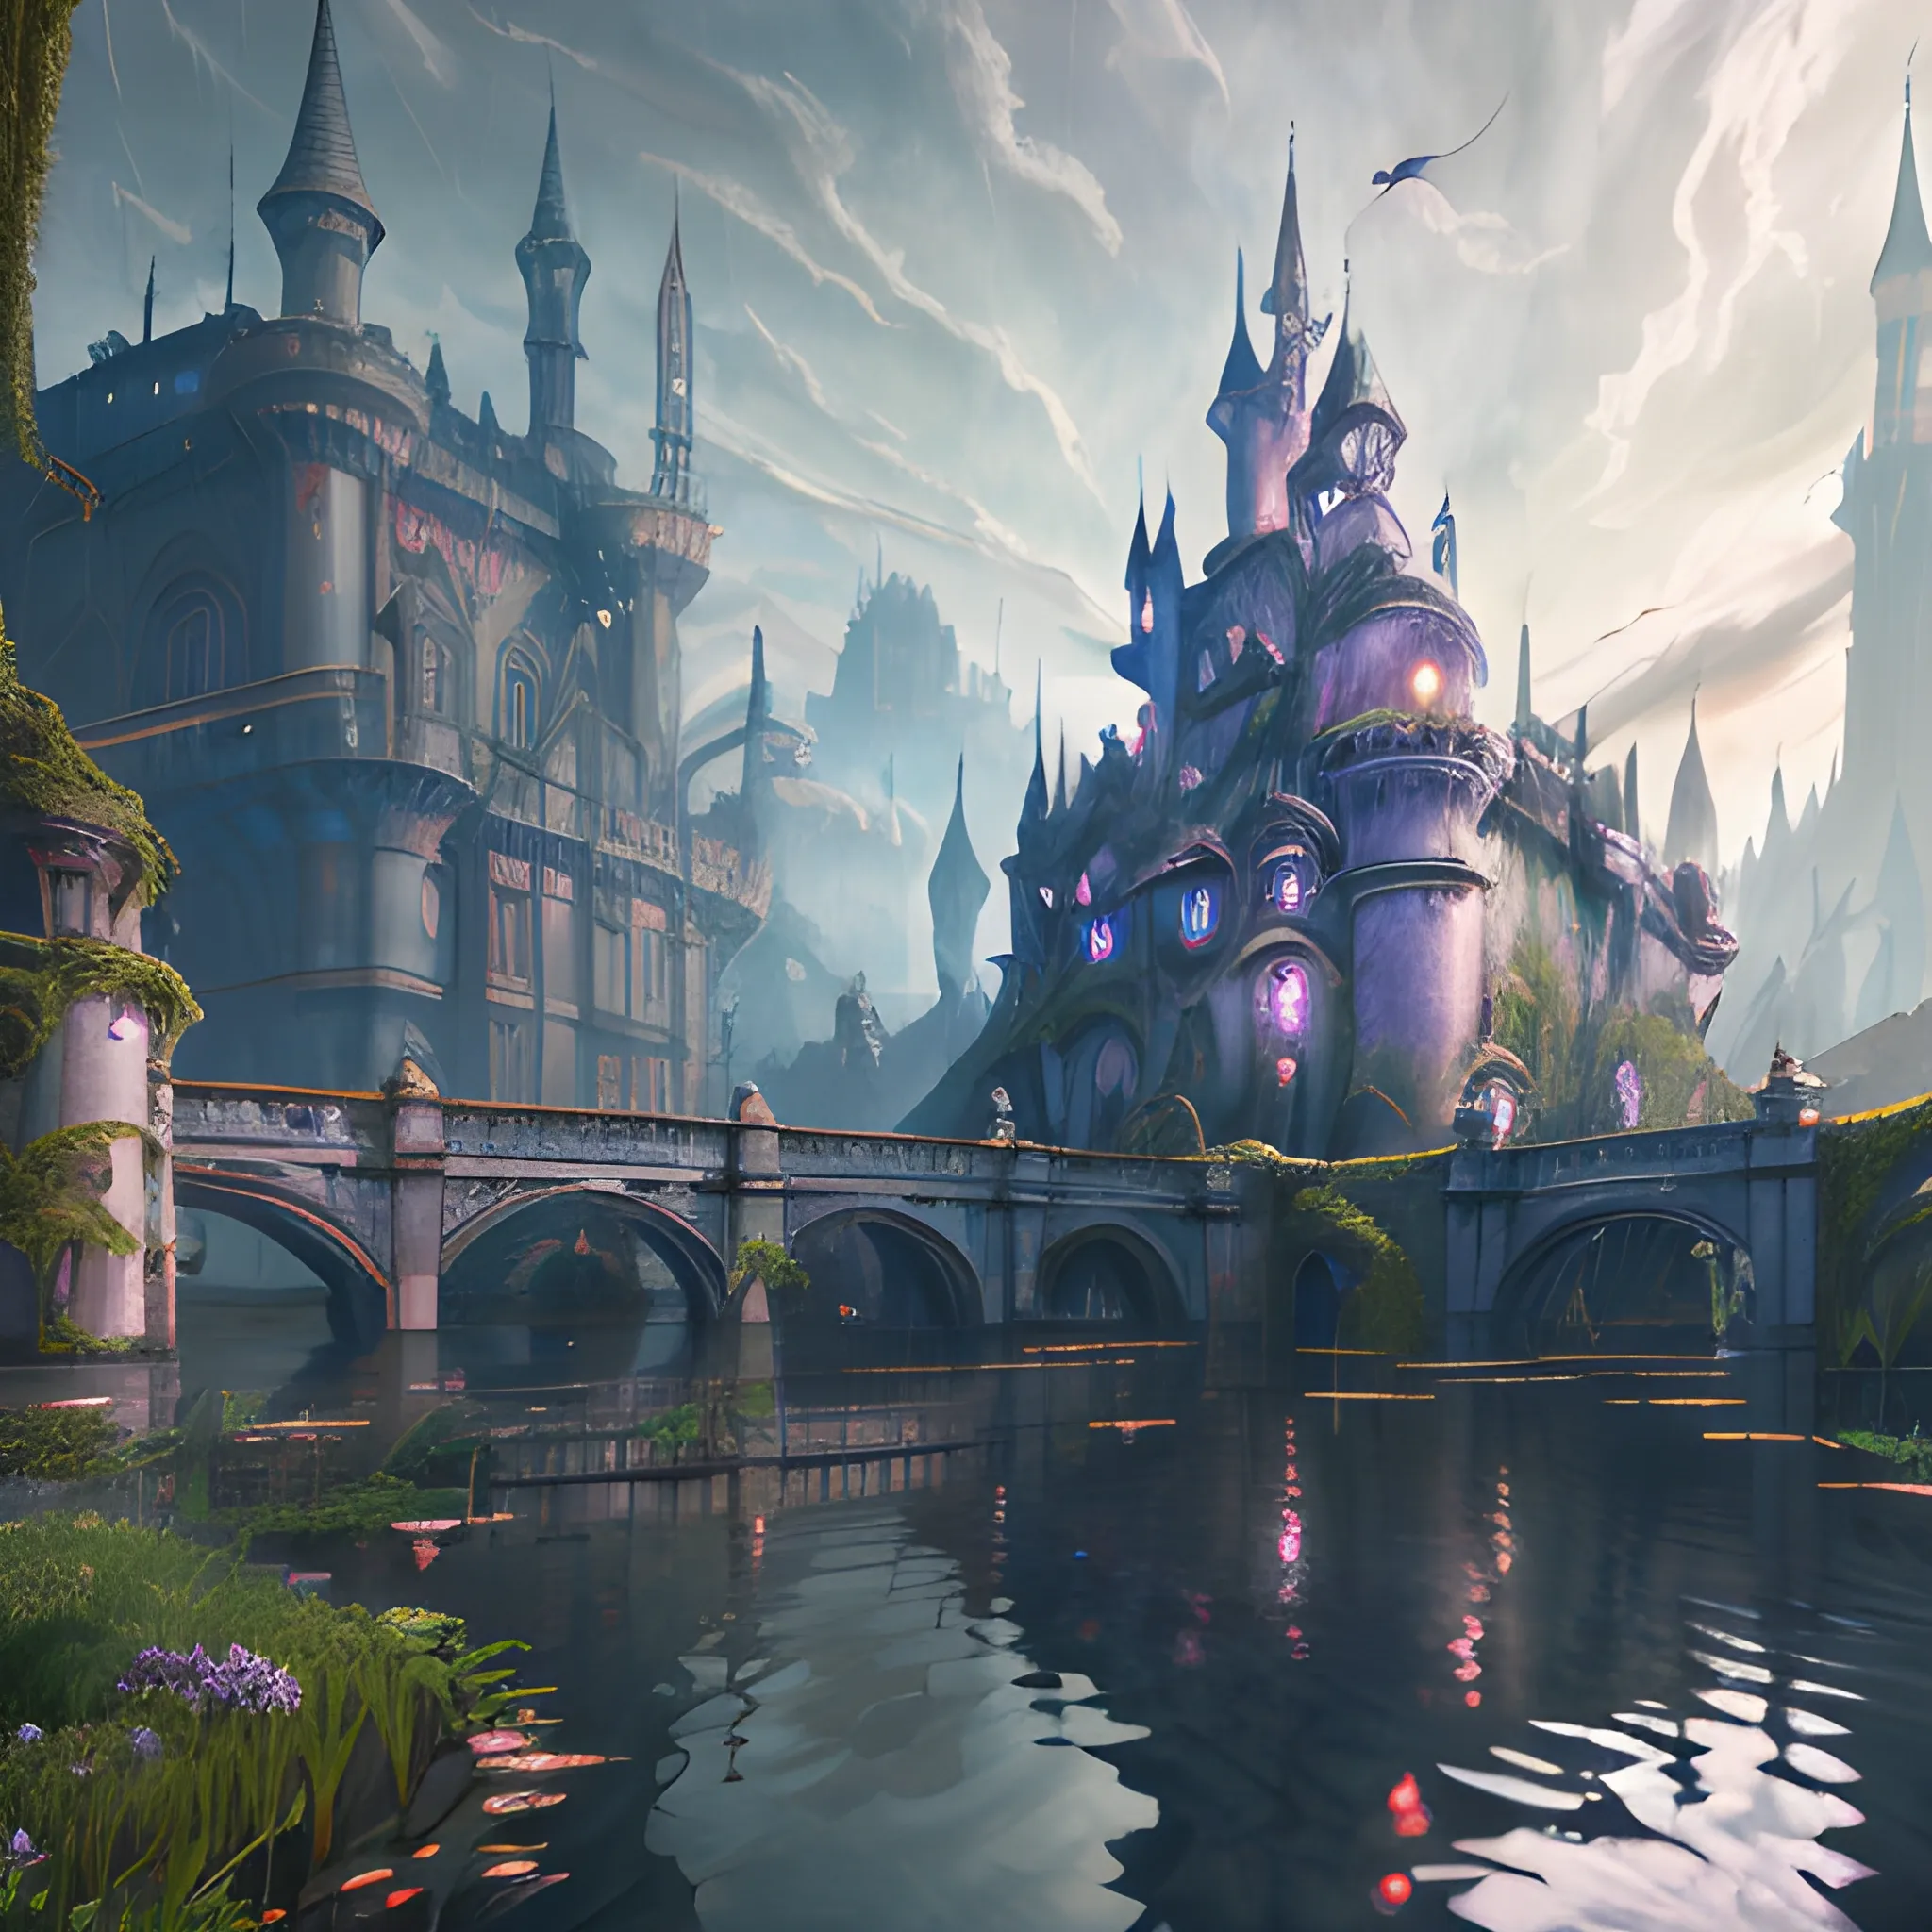 masterpiece, perspective, curious old secret flooded castle, cascading armor shops and potion shops, art nouveau, animation art, dark fantasy, overgrown with lush vegetation, cinematic, smooth, detailed, hyperrealism, very small aperture, clear reflection, post production, post-processing, 8k, retouch, HDR, Super-Resolution, Soft Lighting, Ray Tracing Global Illumination, Lumen Reflections, pastel color palette, art deco, Bloodborne feeling